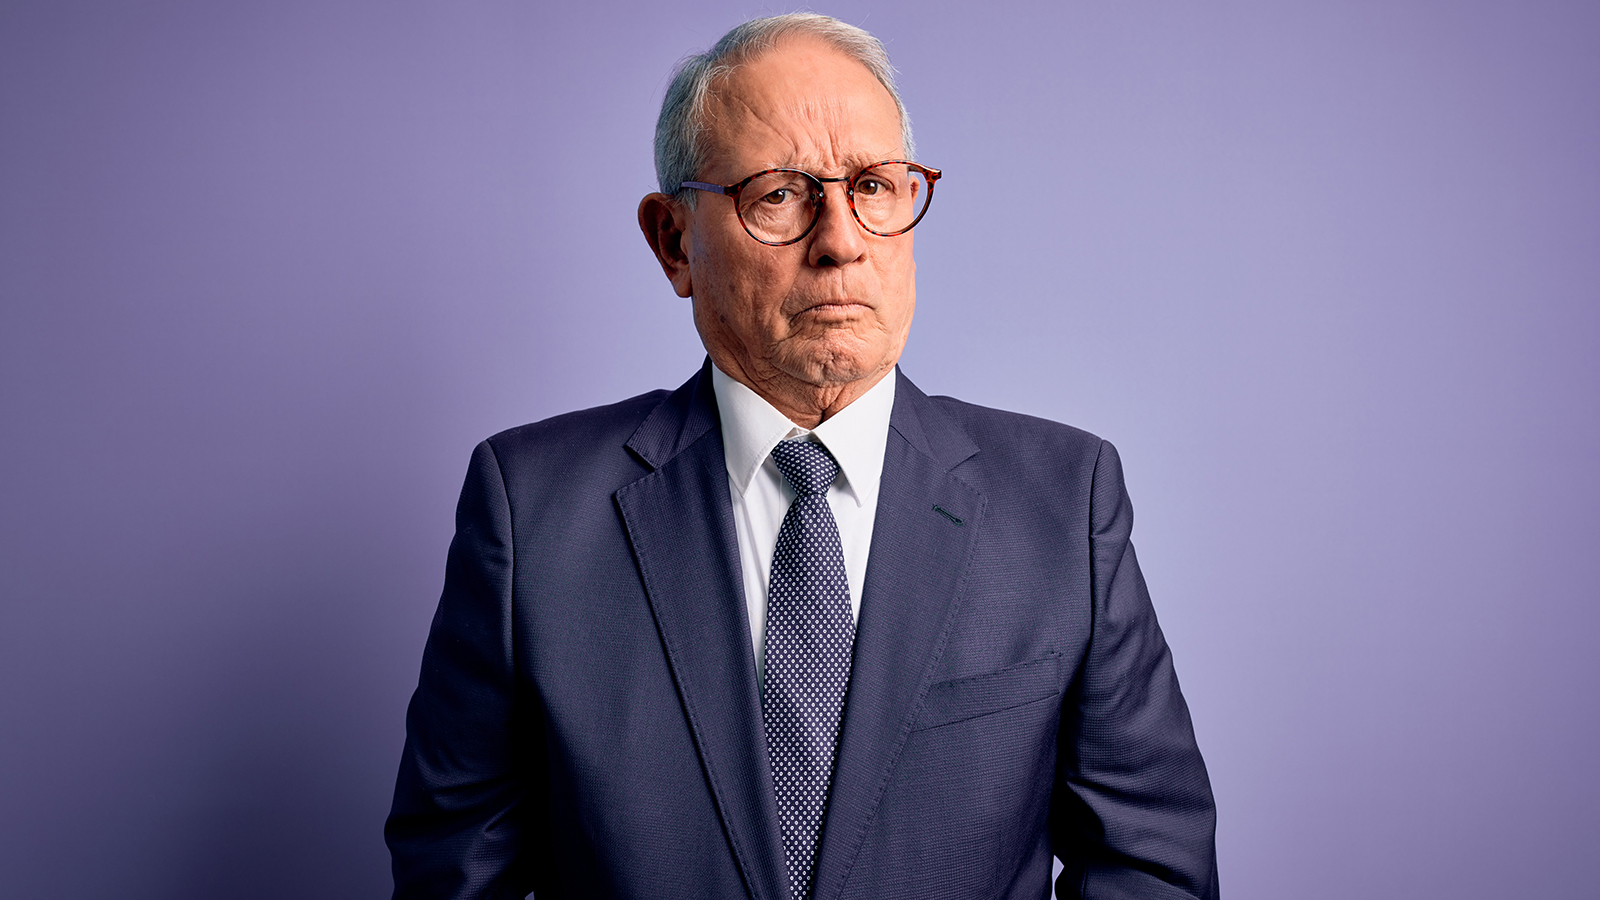 Grey haired senior business man wearing glasses and elegant suit and tie over purple background depressed and worry for distress, crying angry and afraid. Sad expression.